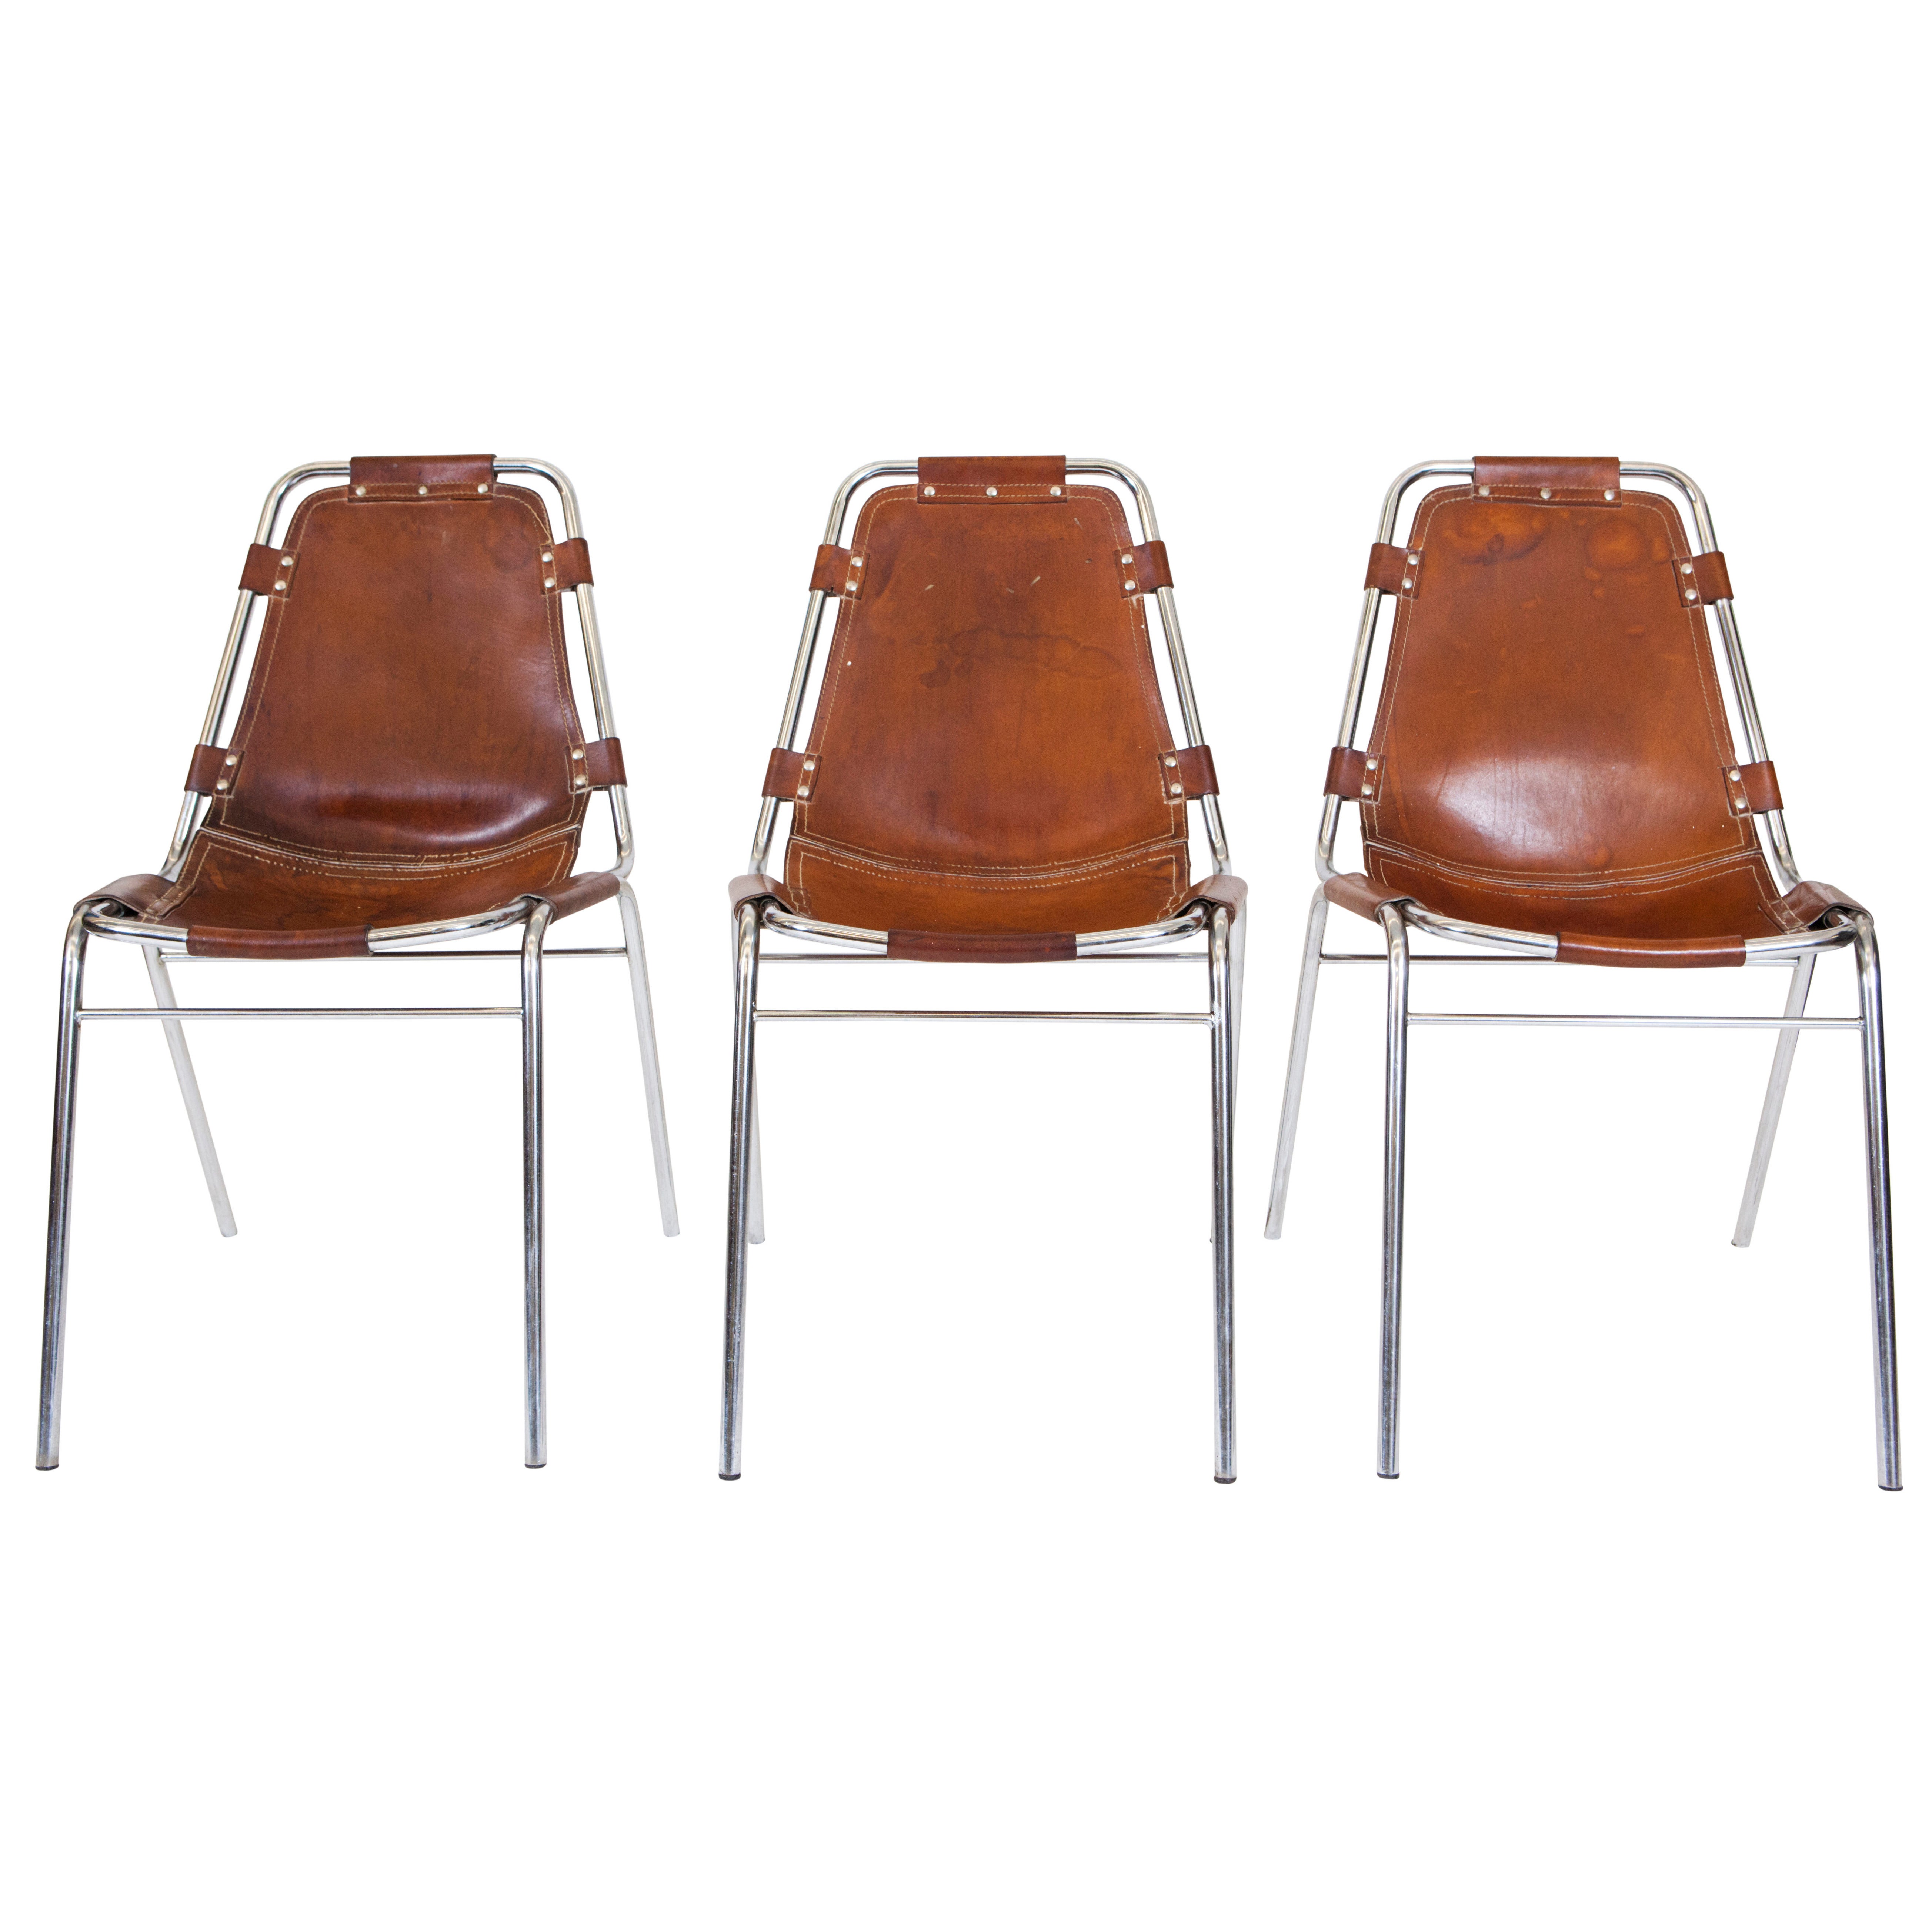 Four "Les Arcs" Chairs by Charlotte Perriand